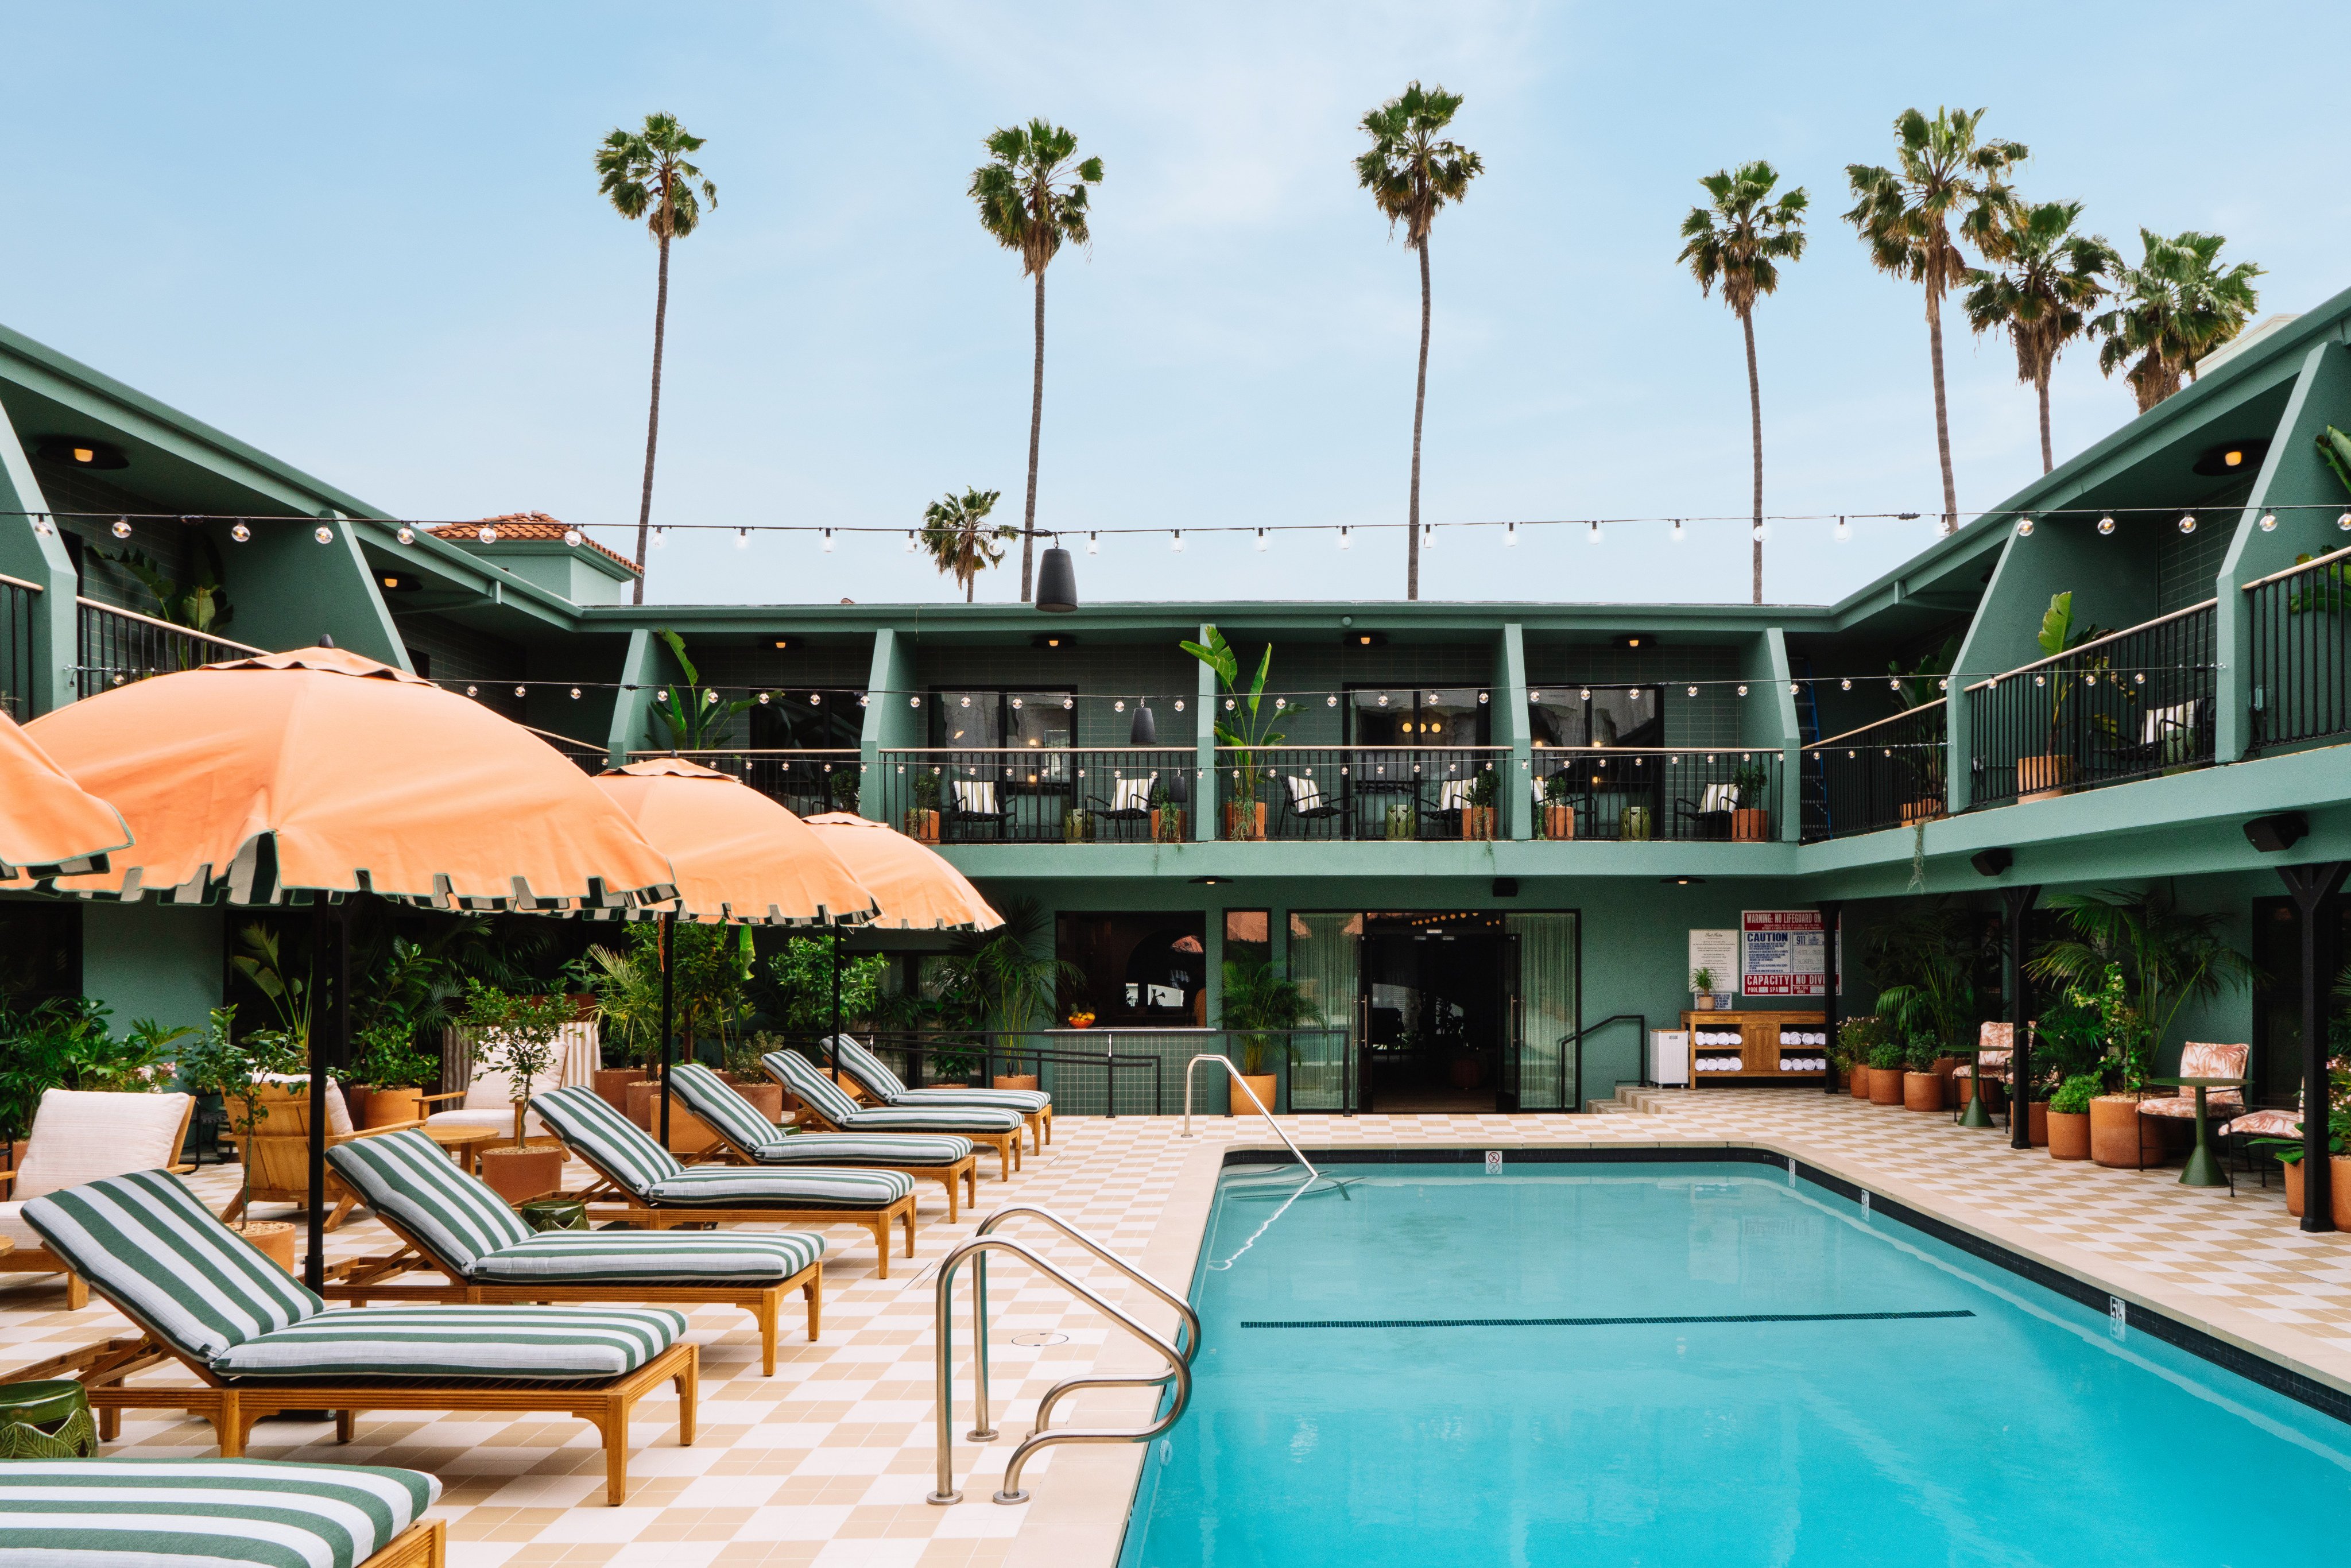 The pool area of Palihotel Hollywood, located on Sunset Boulevard in Los Angeles. Photos: Handout